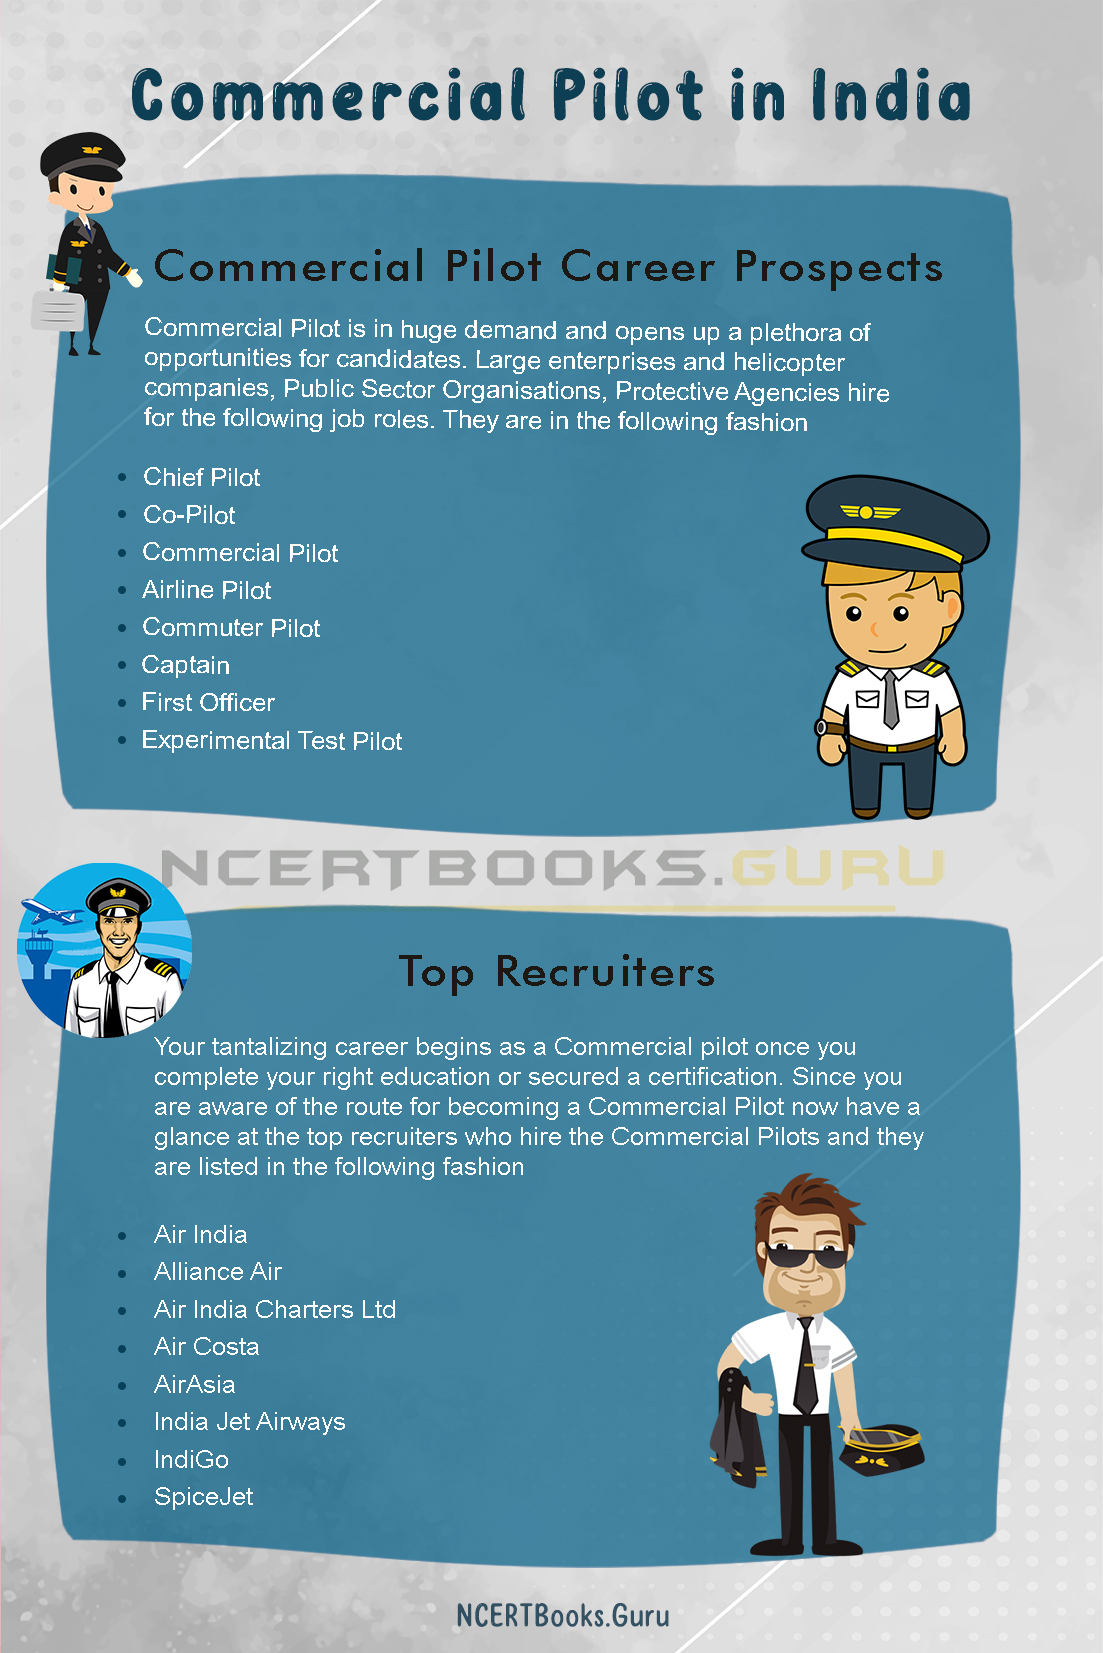 Commercial Pilot in India 2